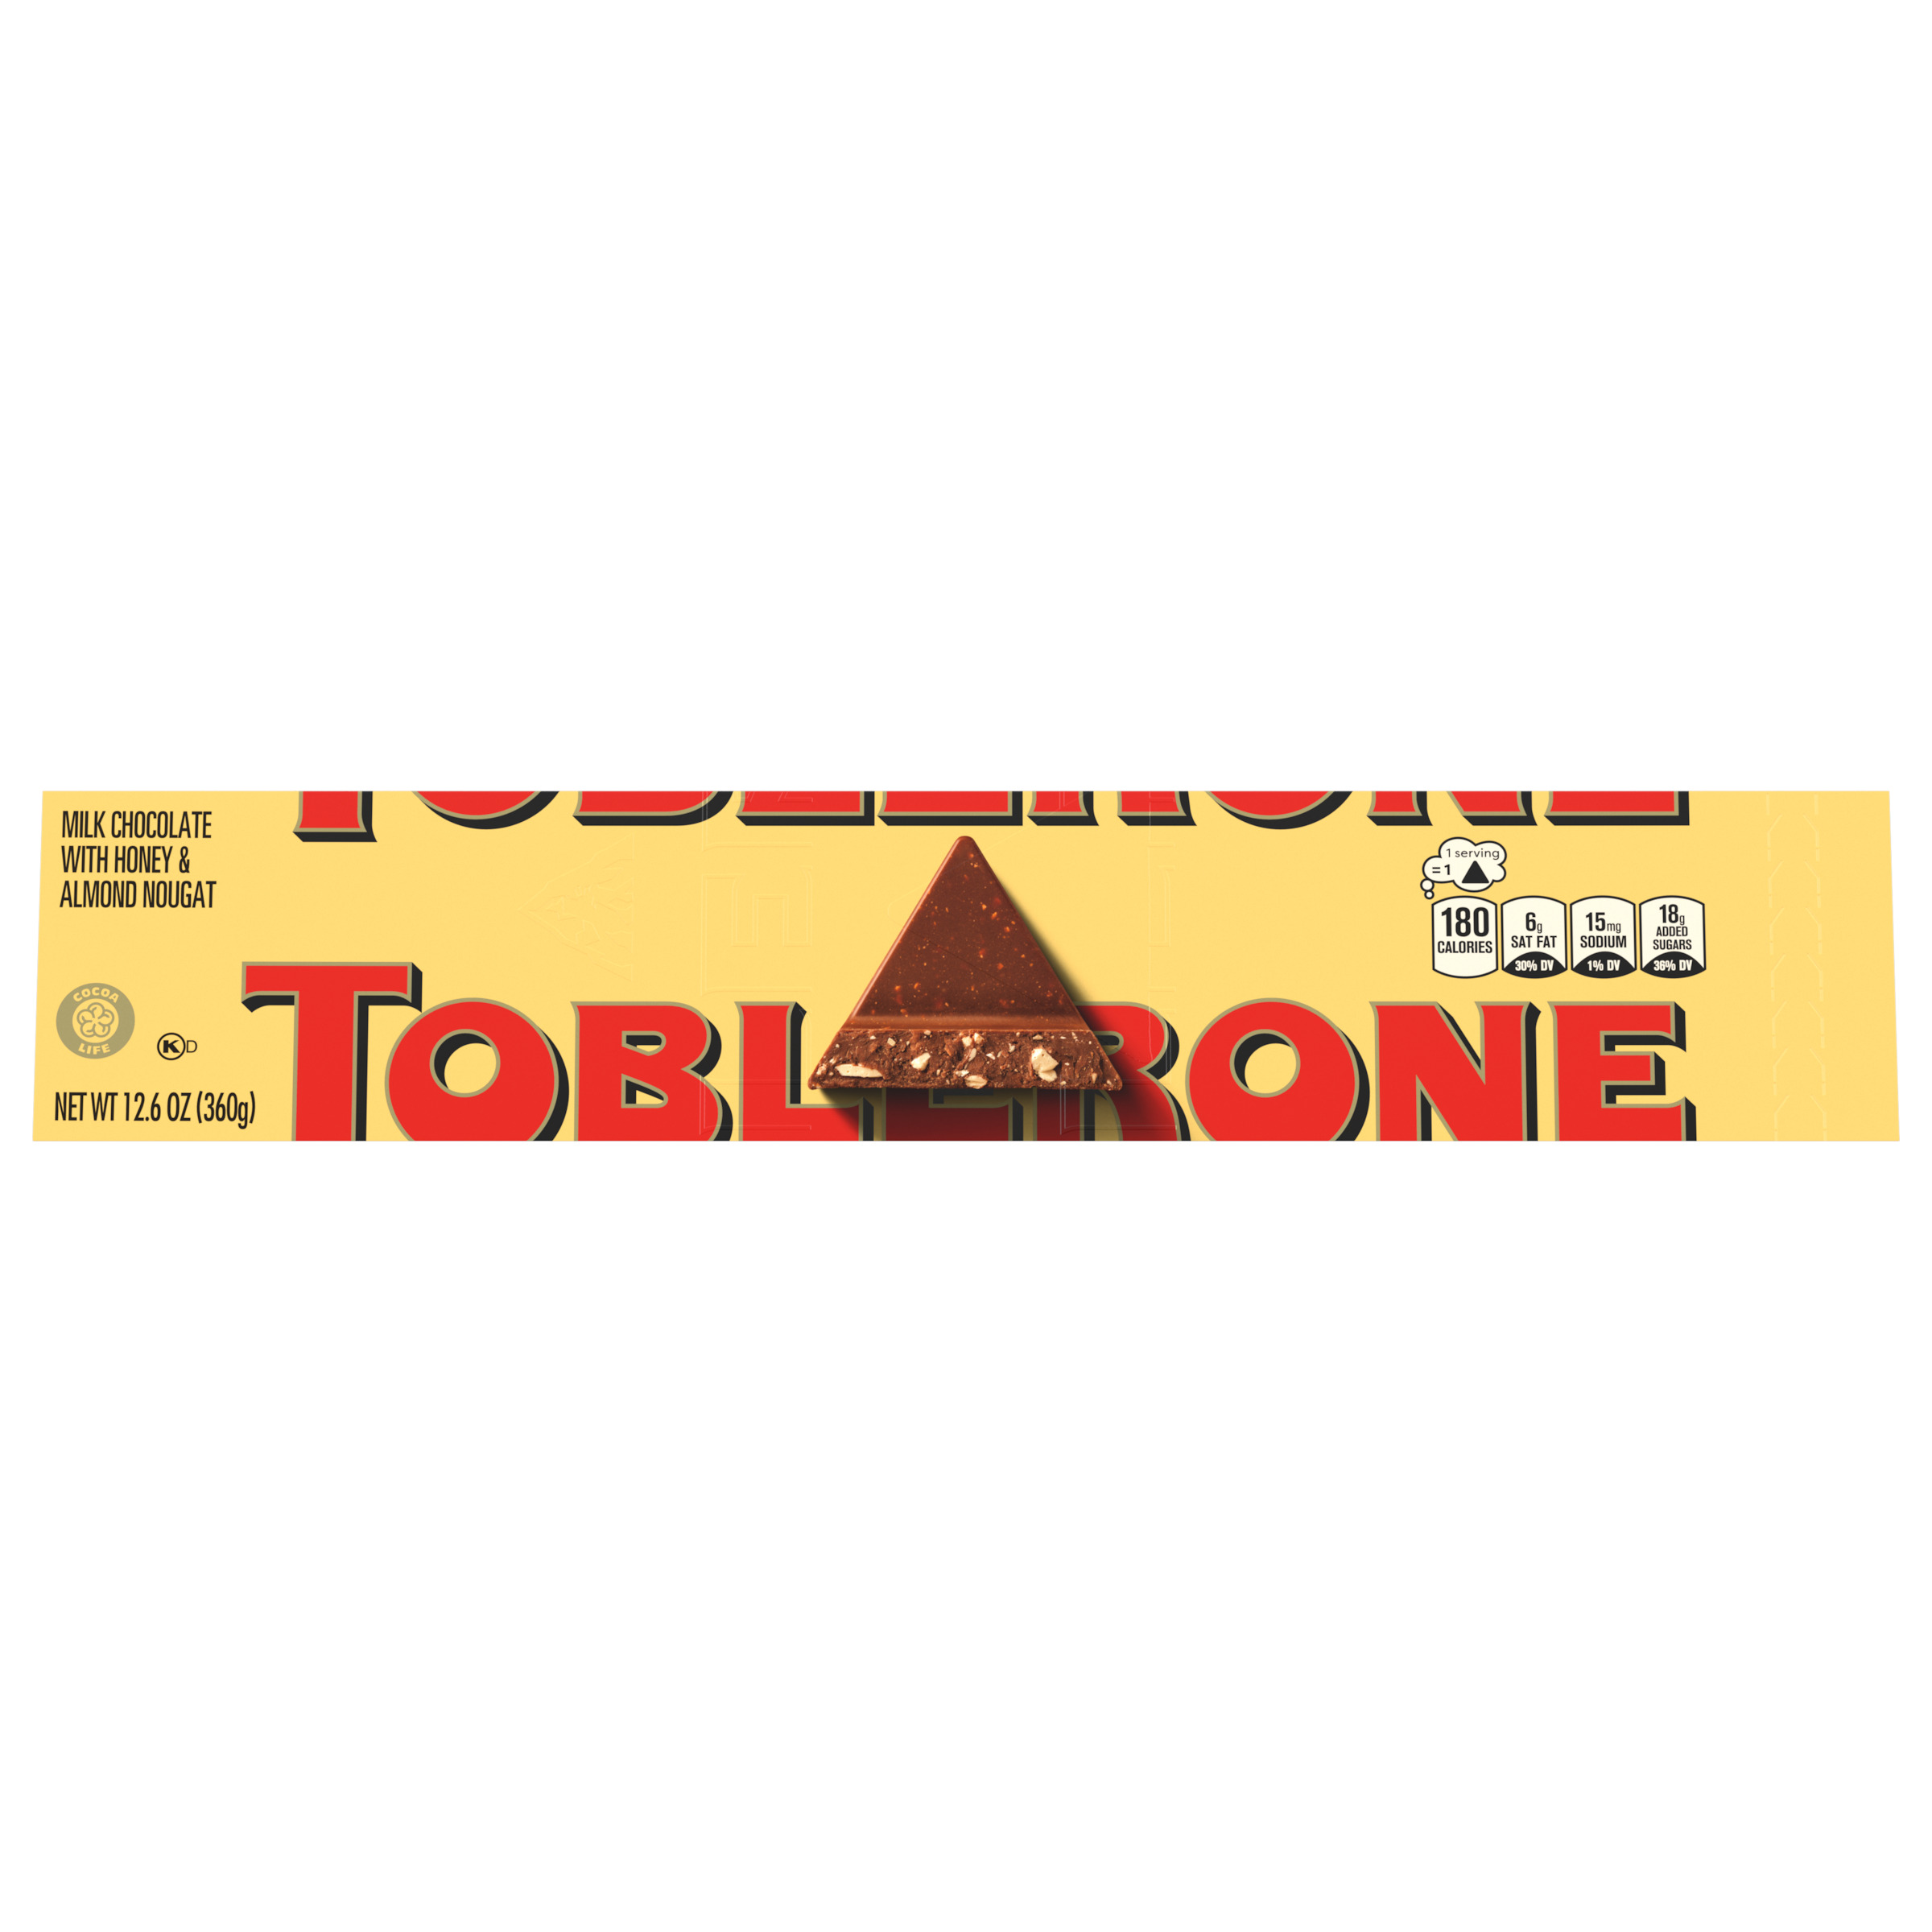 Toblerone Swiss Milk Chocolate Candy Bar with Honey and Almond Nougat, 12.6 oz-1